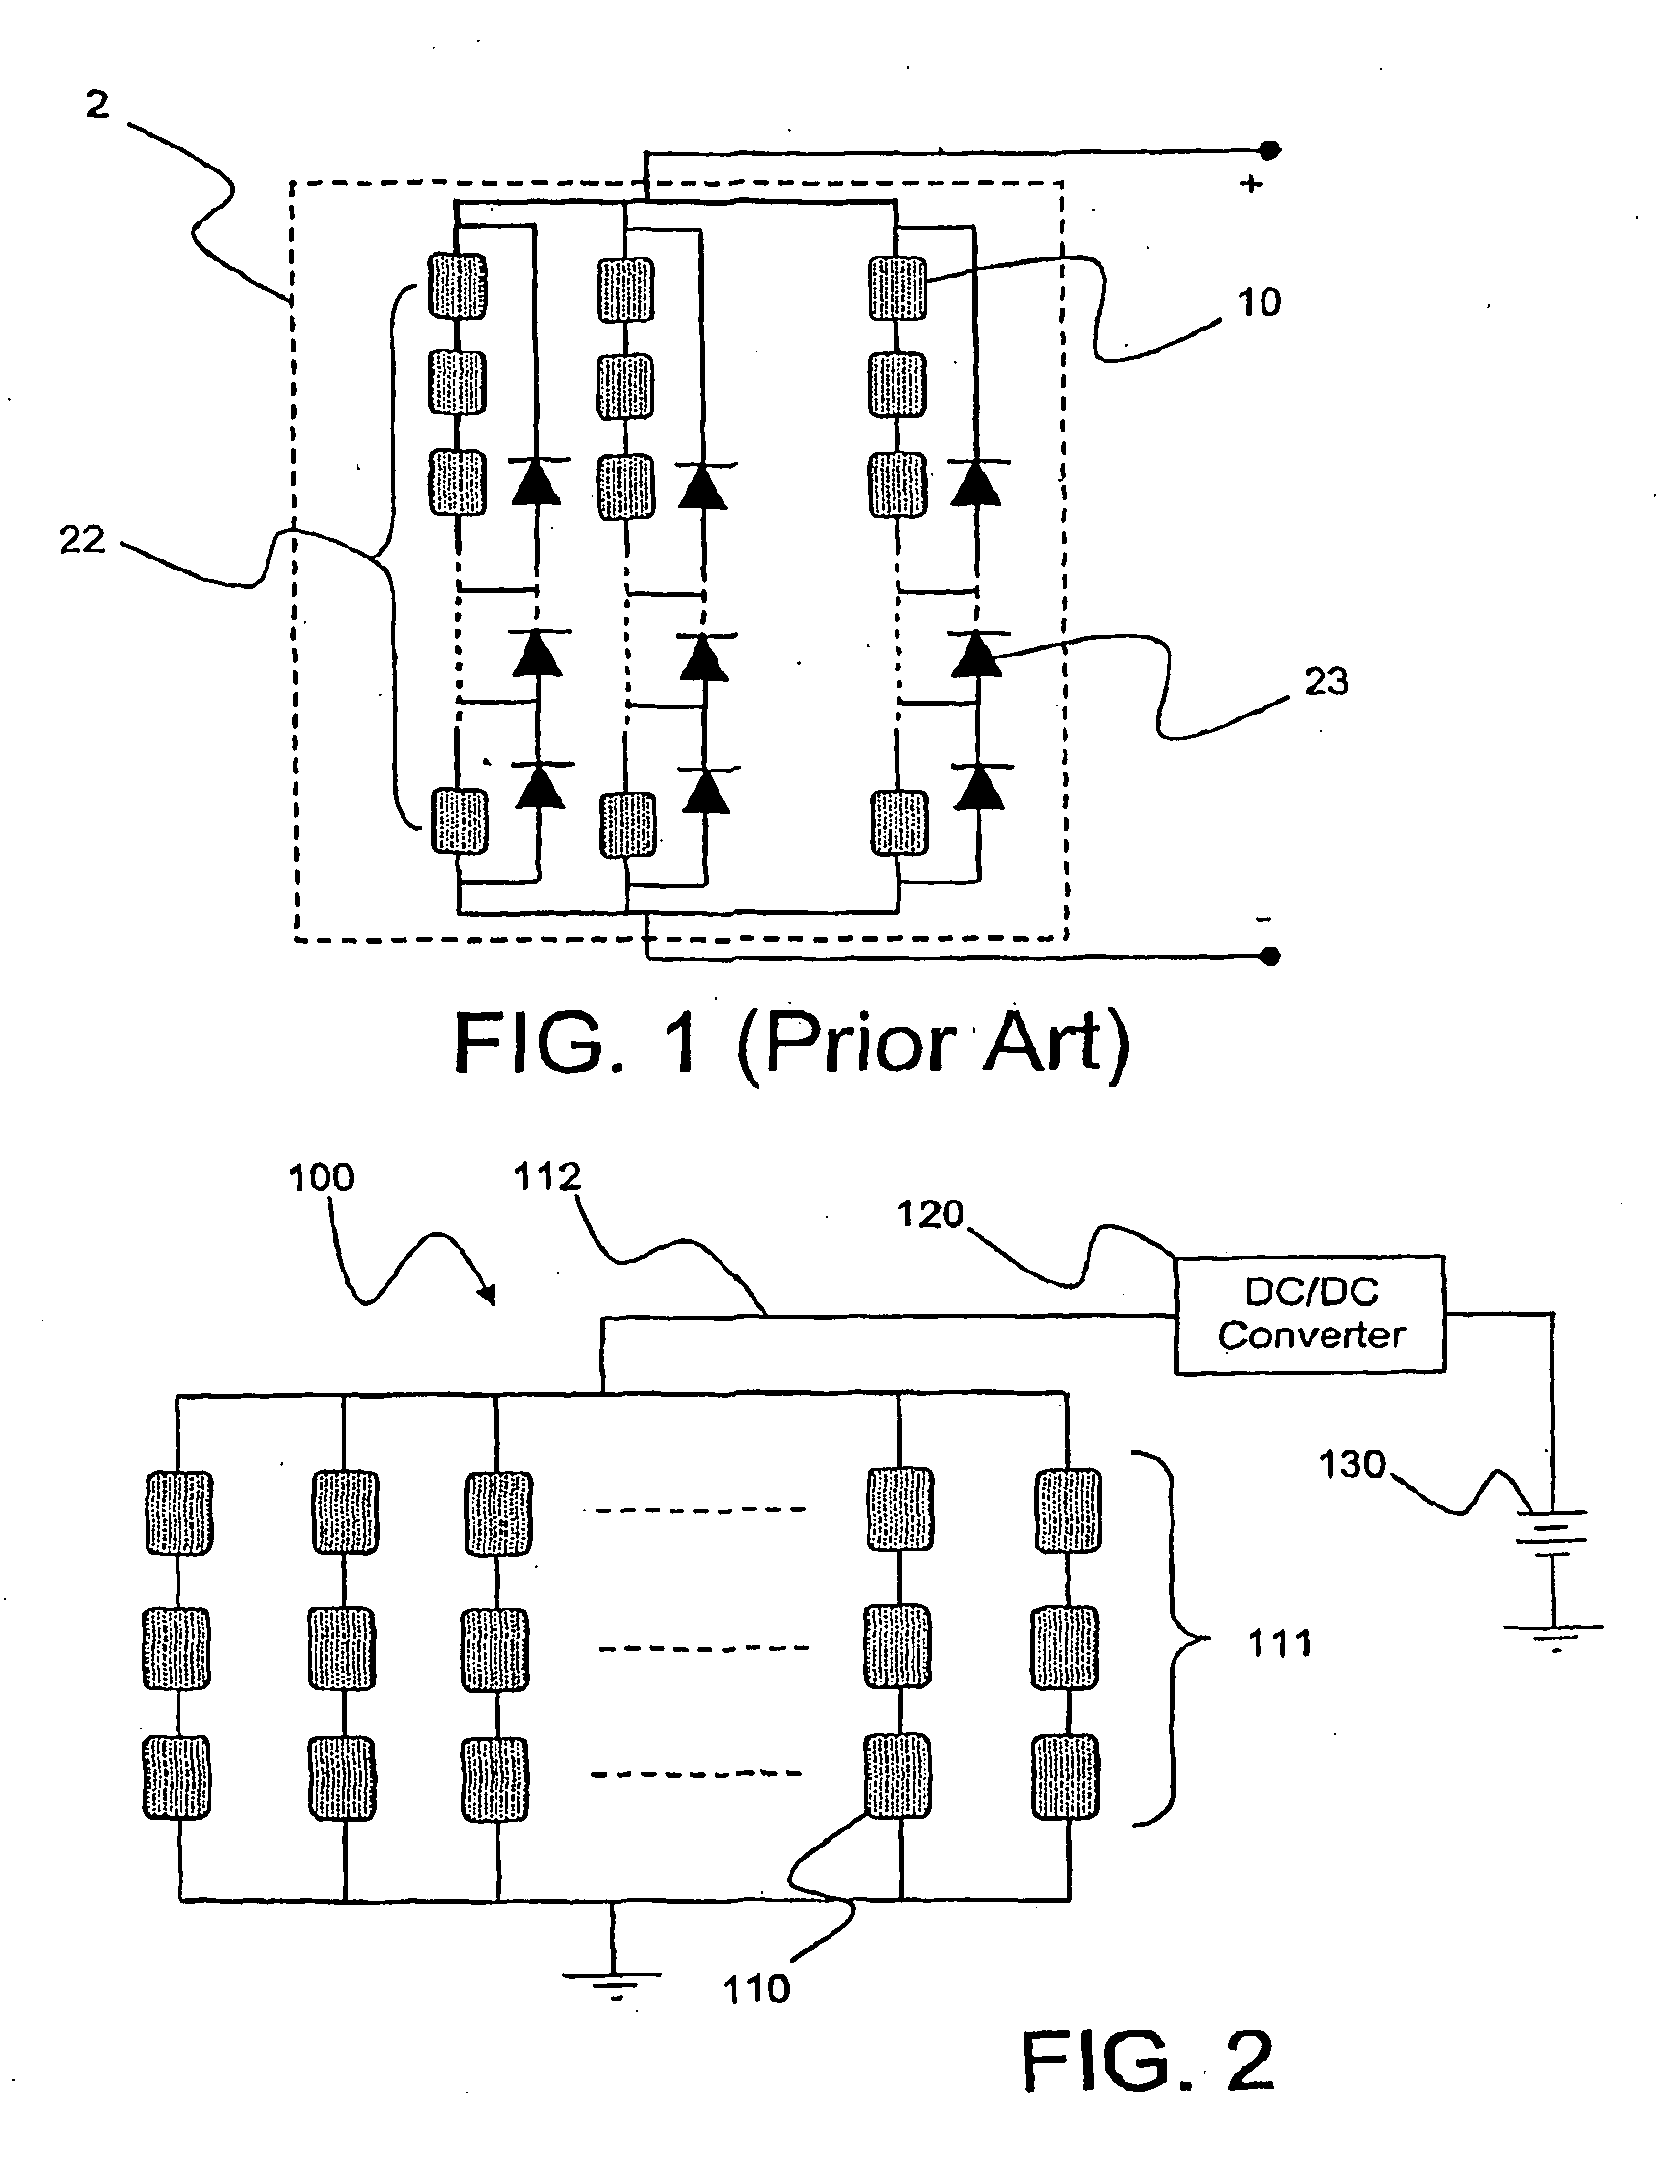 Apparatus and method for enhanced solar power generation and maximum power point tracking